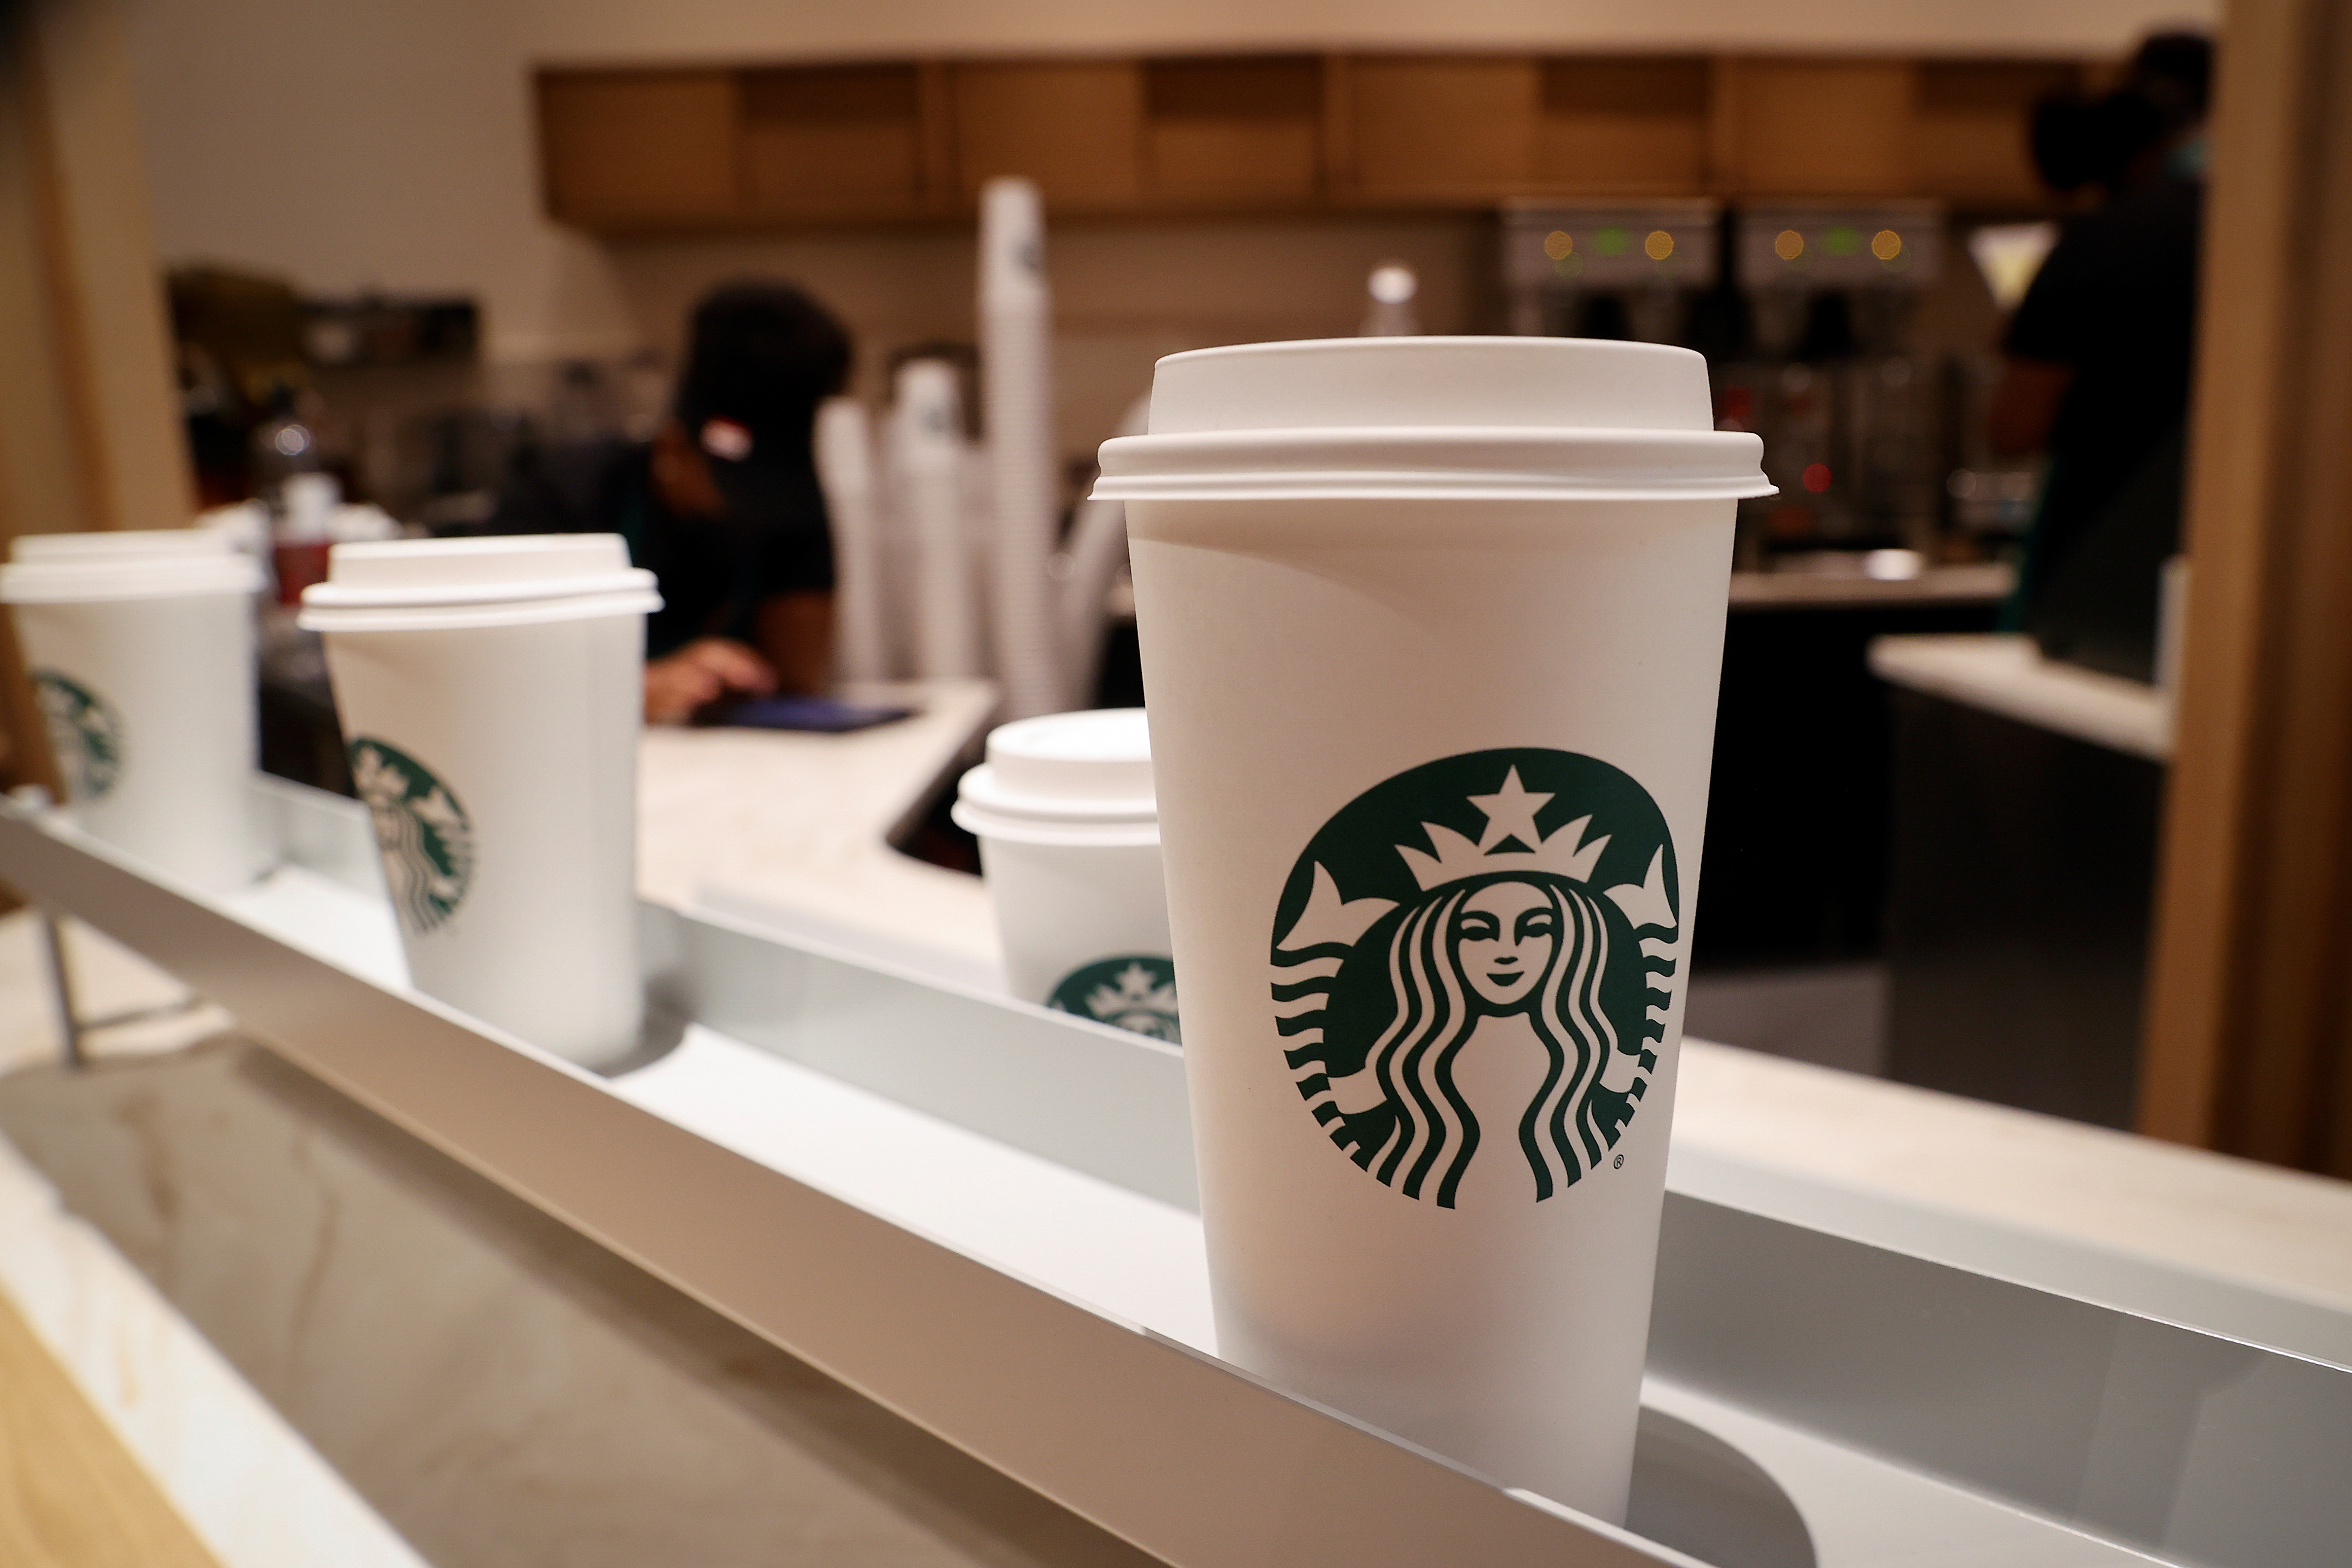 New Starbucks store, its first-ever in partnership with Amazon Go is pictured ahead of opening in New York